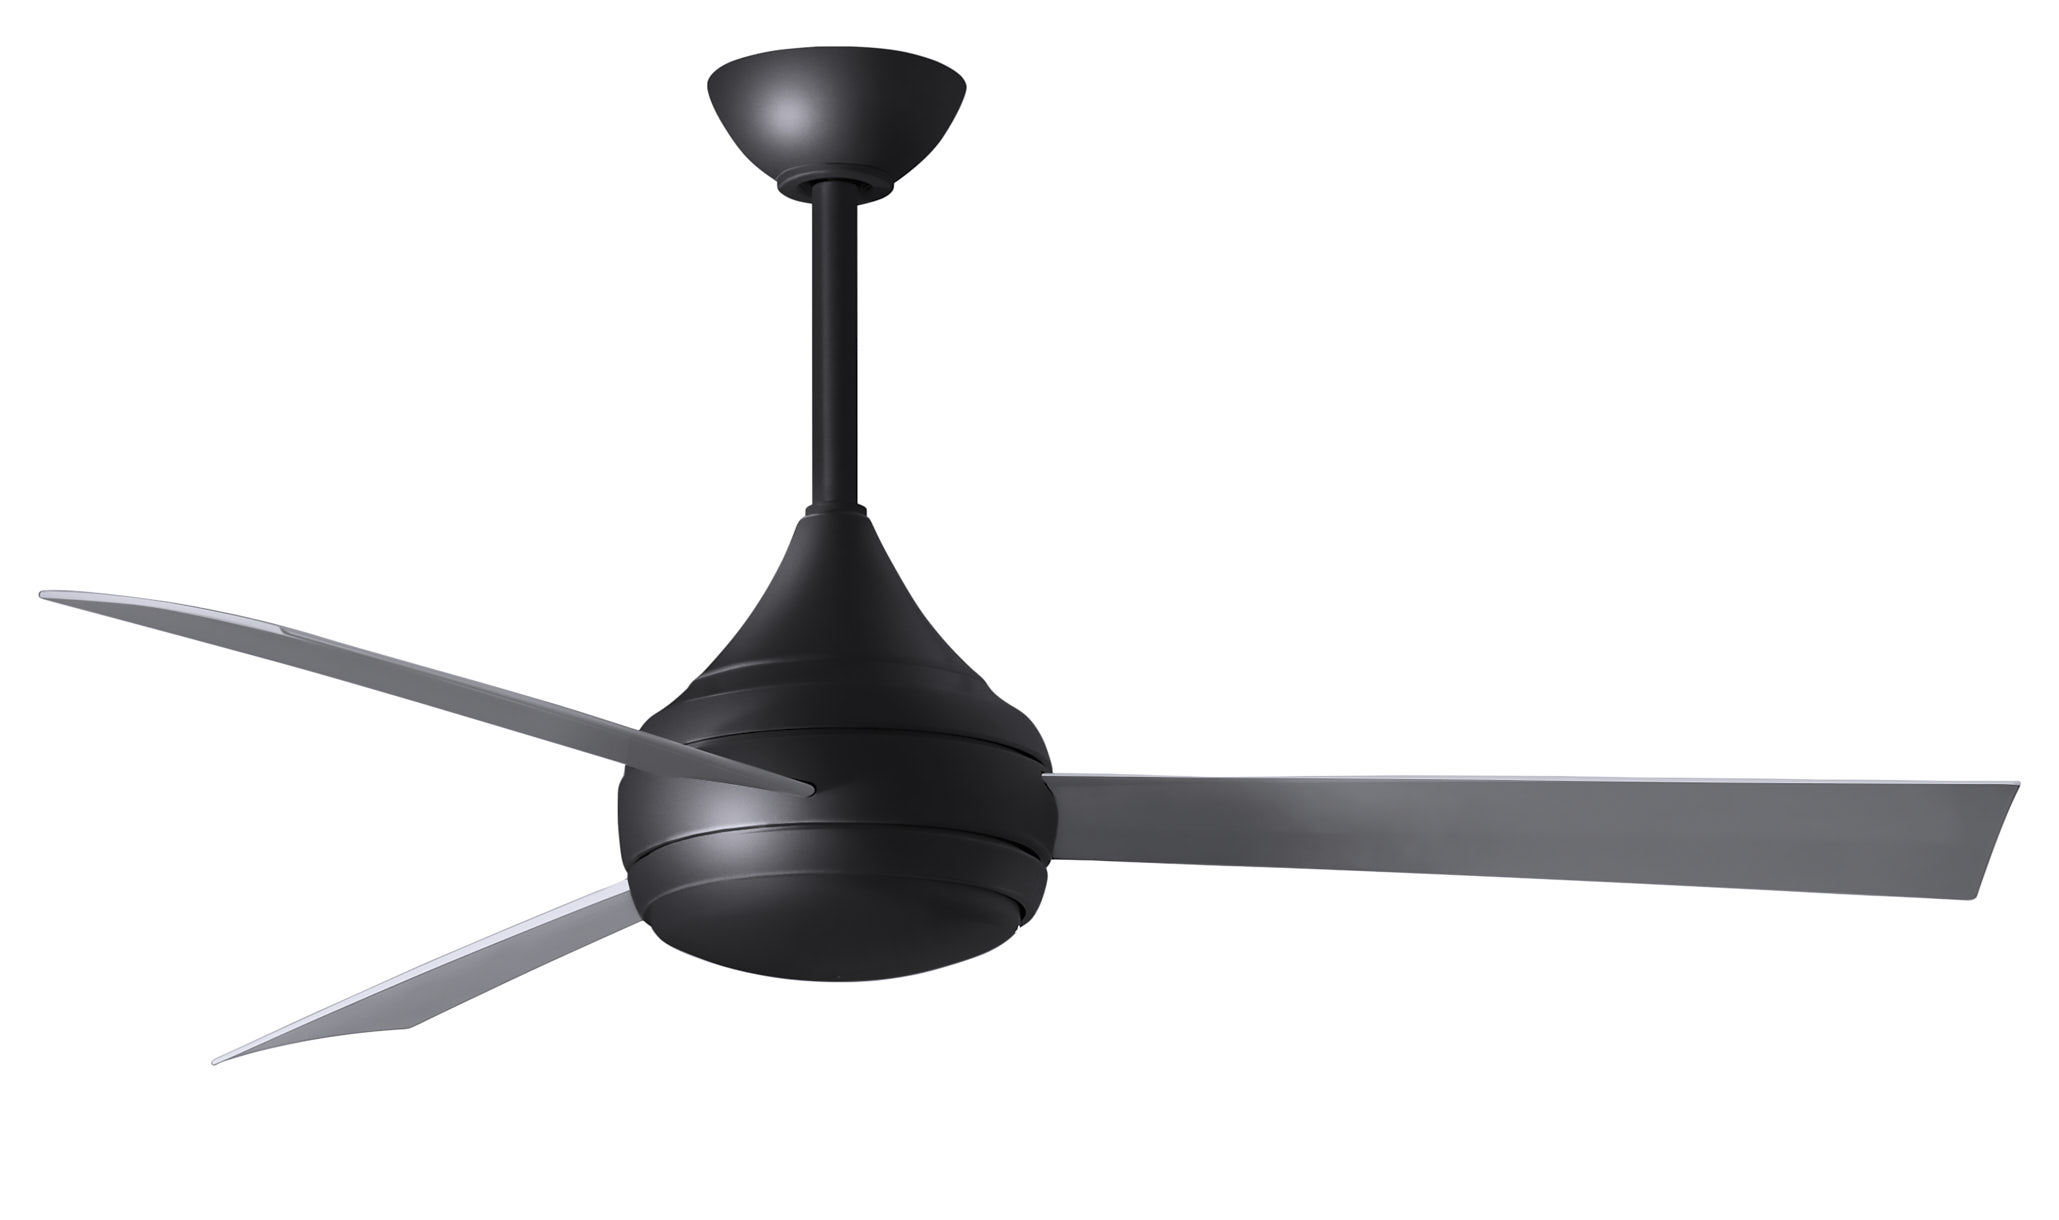 Donaire ceiling fan in Matte Black with Brushed Stainless blades with light cap manufactured by Matthews Fan Company.